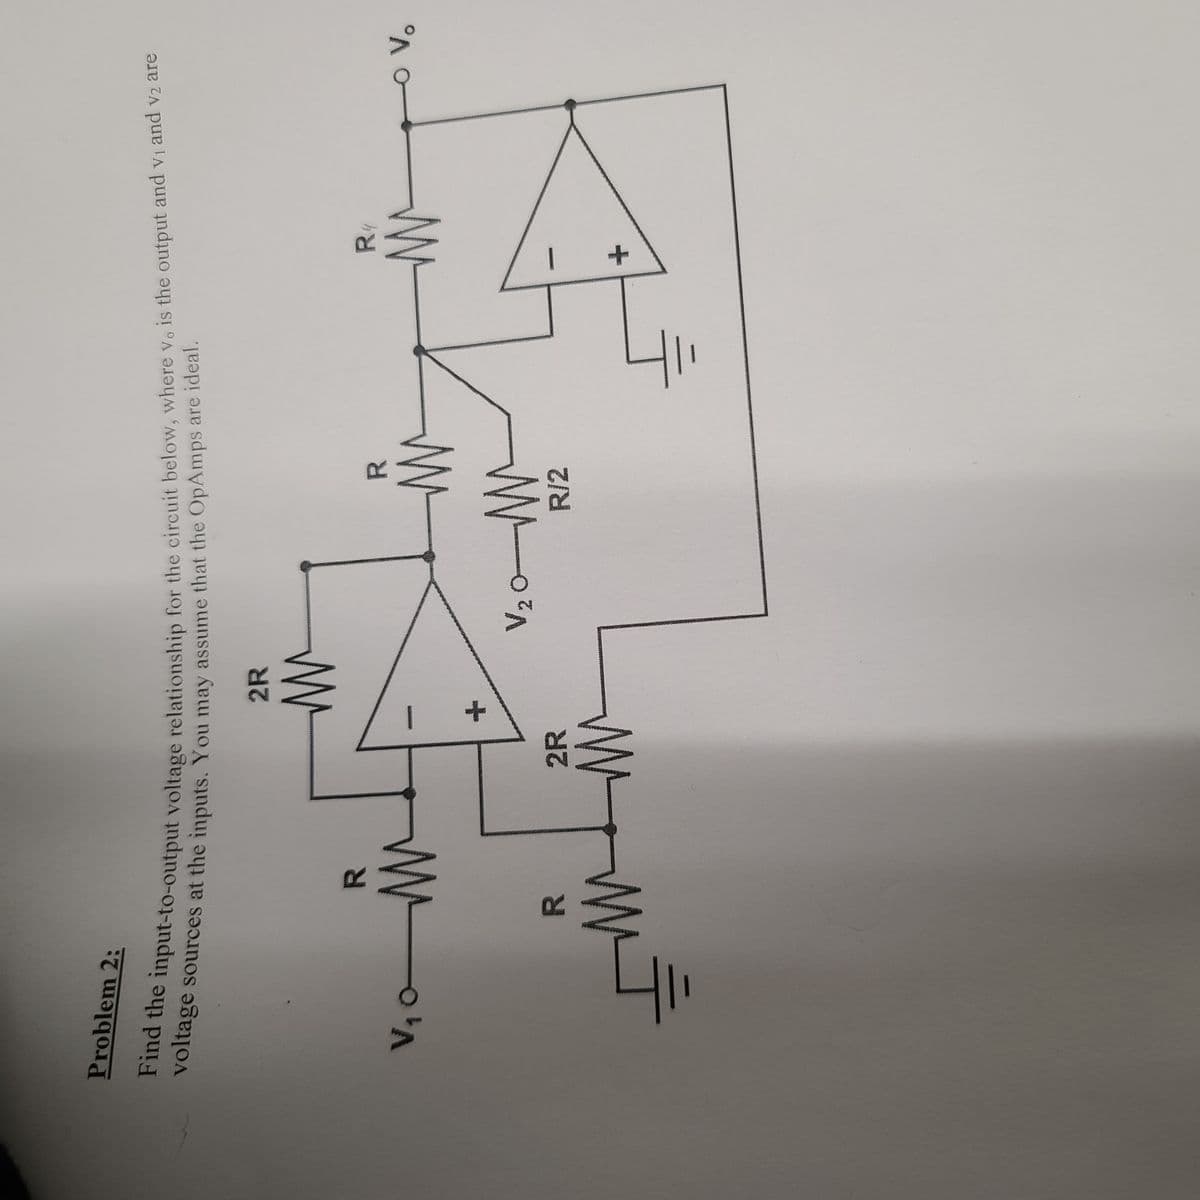 Problem 2:
Find the input-to-output voltage relationship for the circuit below, where v. is the output and v₁ and v₂ are
voltage sources at the inputs. You may assume that the OpAmps are ideal.
V₁C
Ţ
R
ли
R
M
2R
M
2R
M
R
-M
V₂0-M
R/2
Ţ
R4
M
O V.